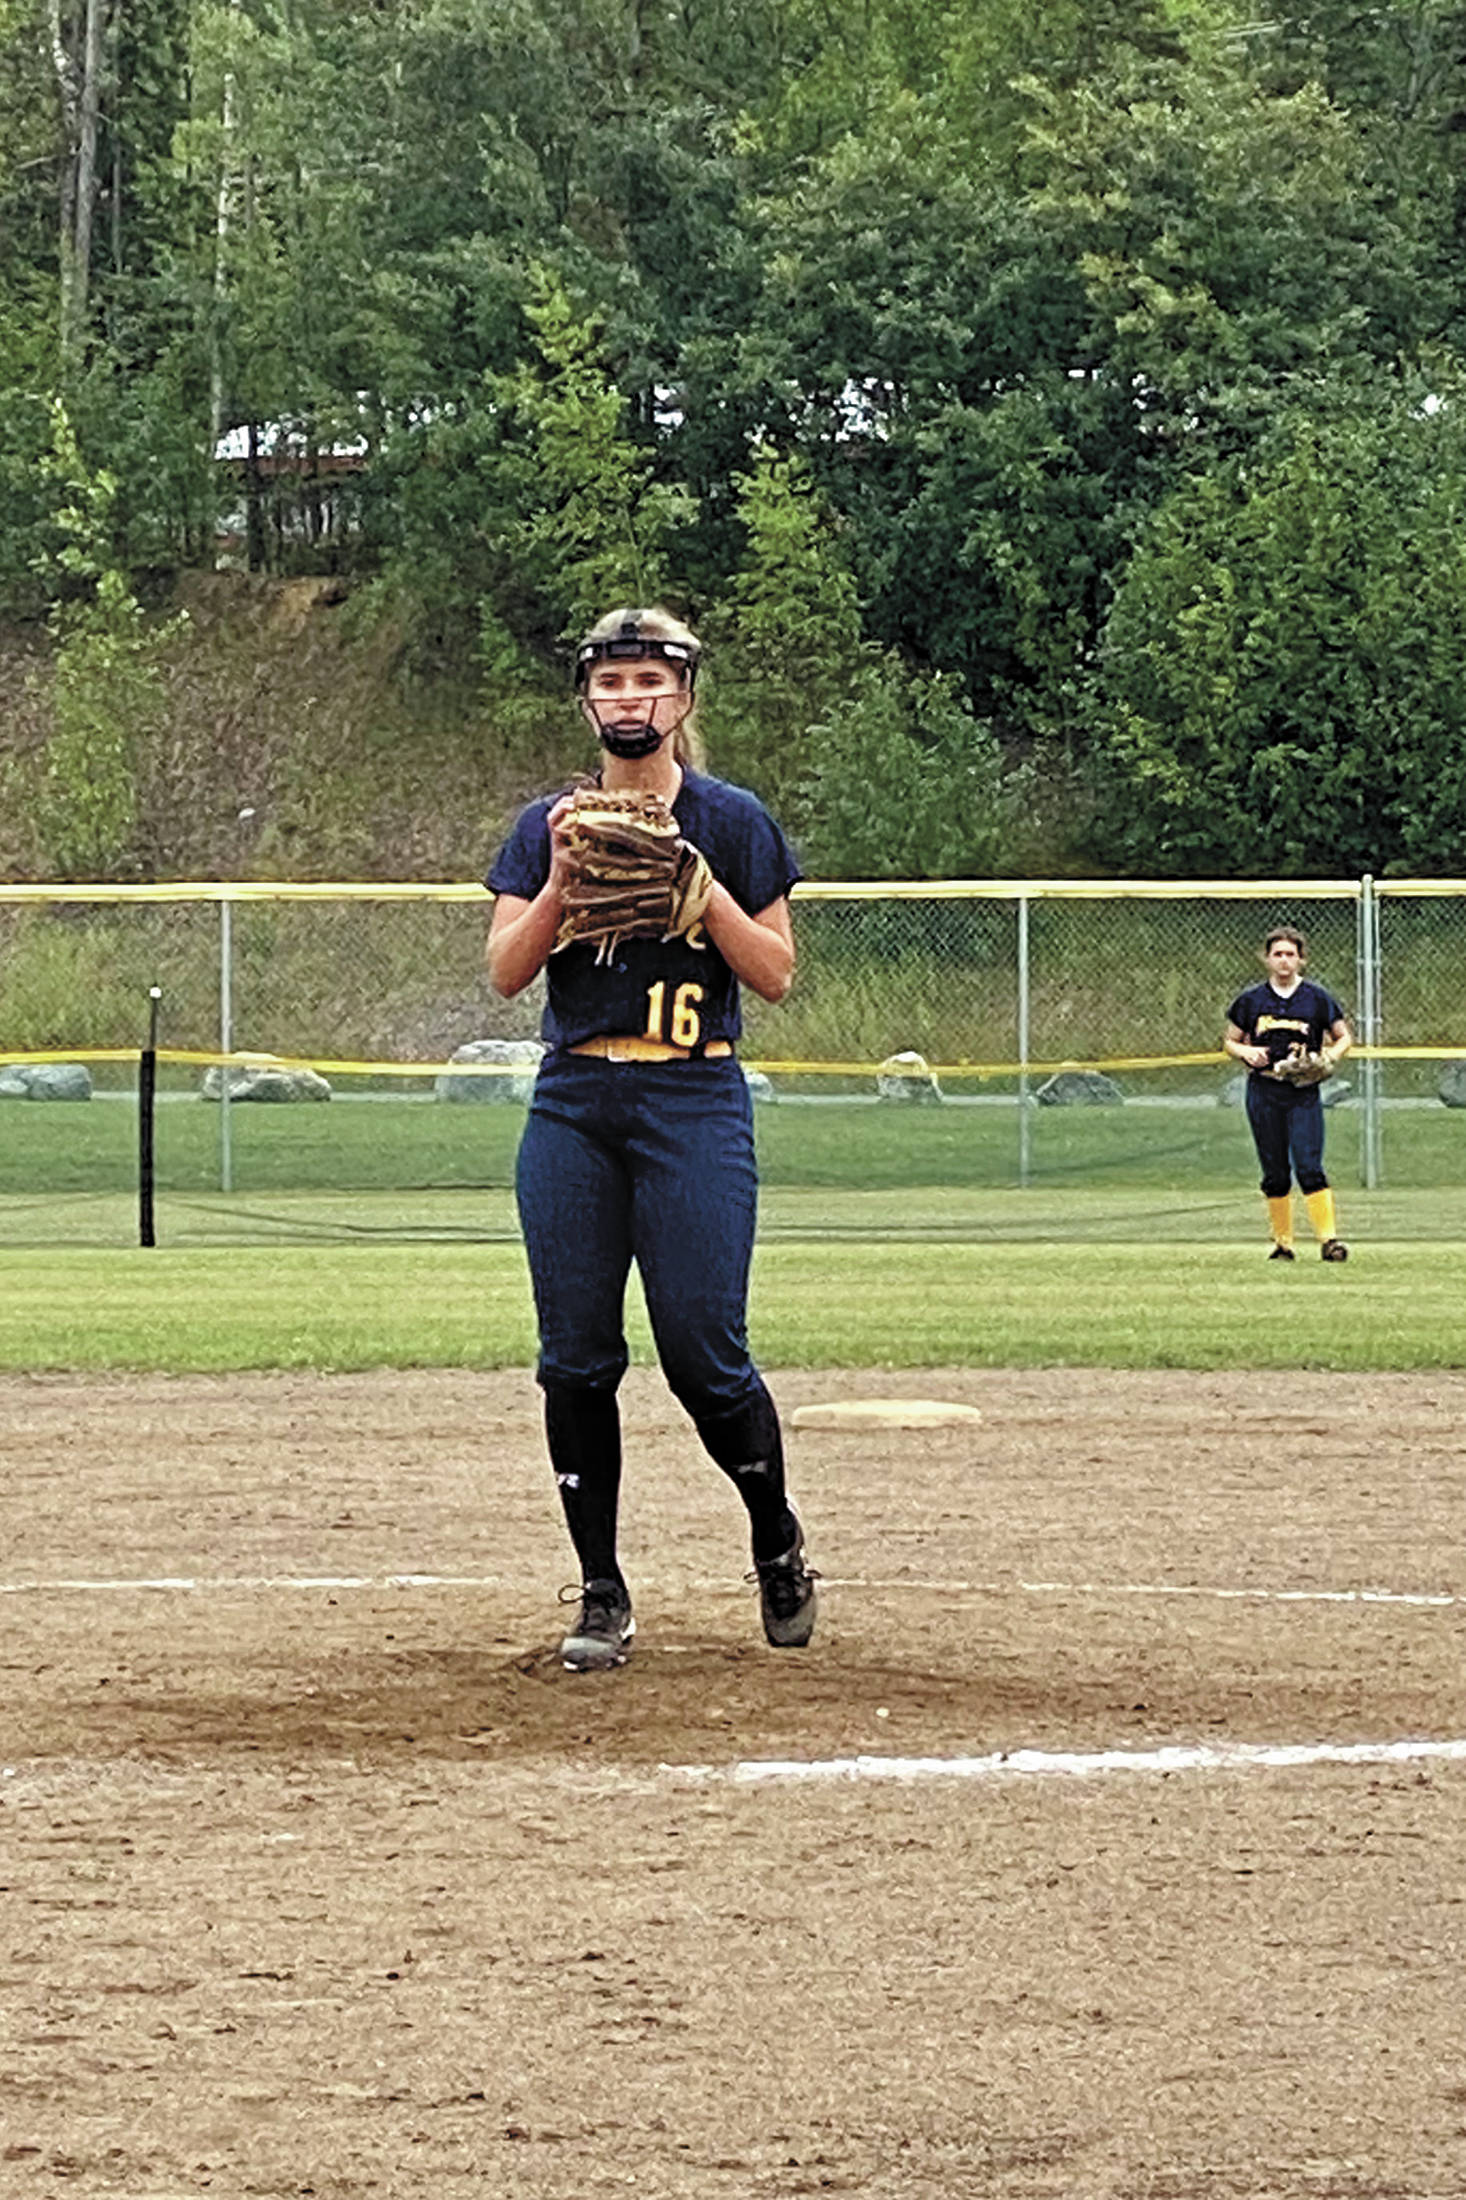 Homer High School graduate Annalynn Brown prepares to pitch during a state tournament for softball the weekend of Aug. 1-2, 2020 in Anchorage, Alaska. (Photo by Monica Anderson)